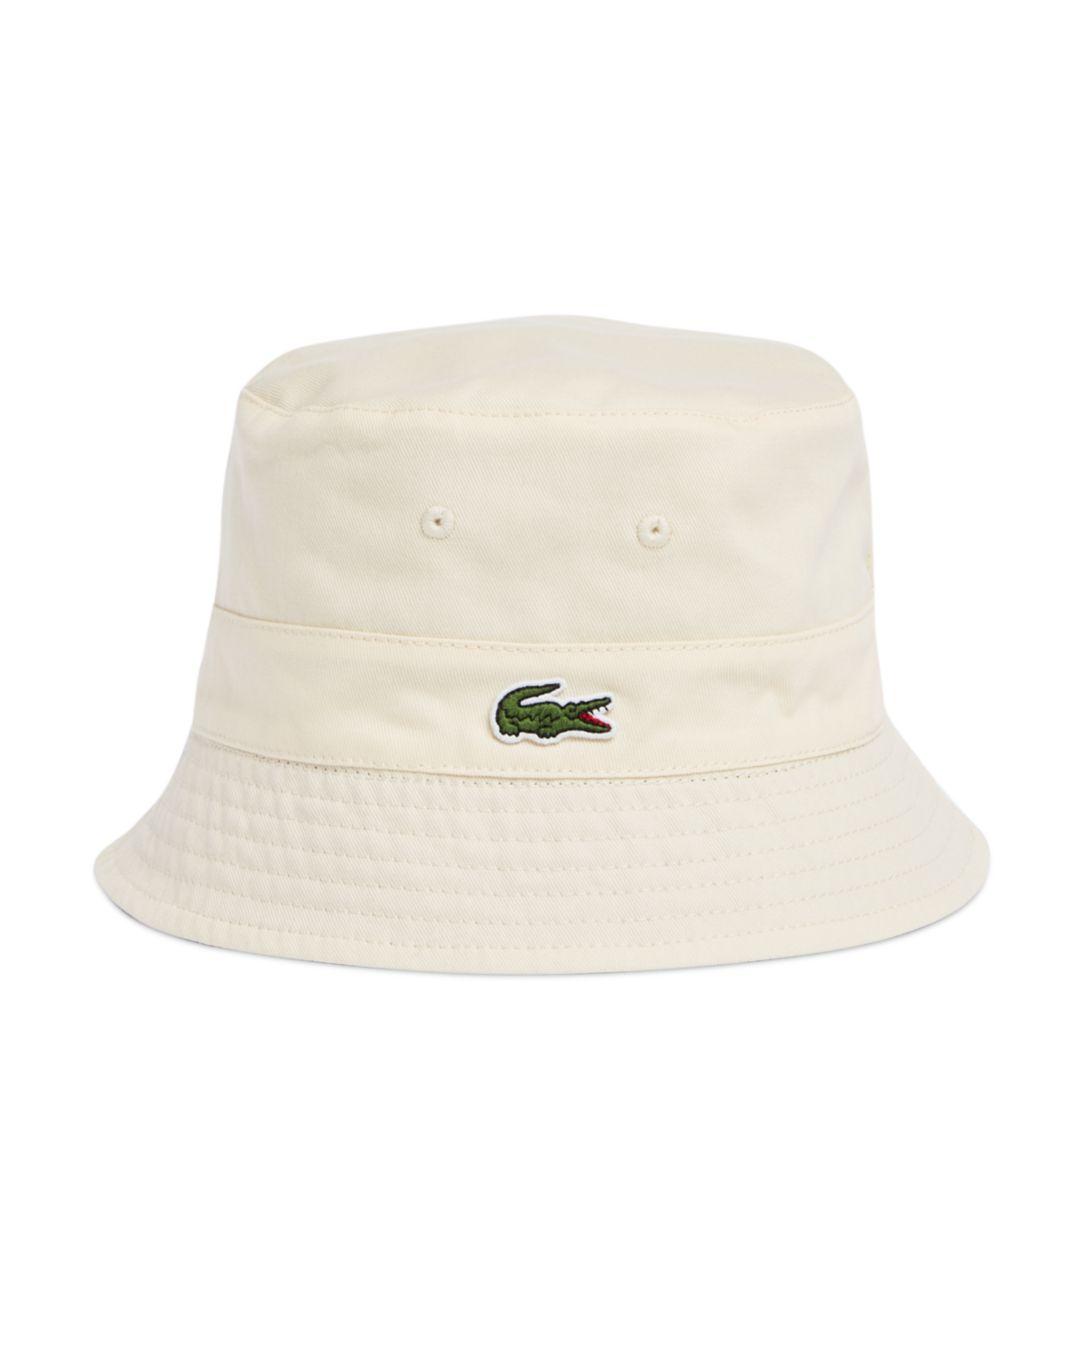 Lacoste Color Block Bucket Hat in Natural for Men - Lyst